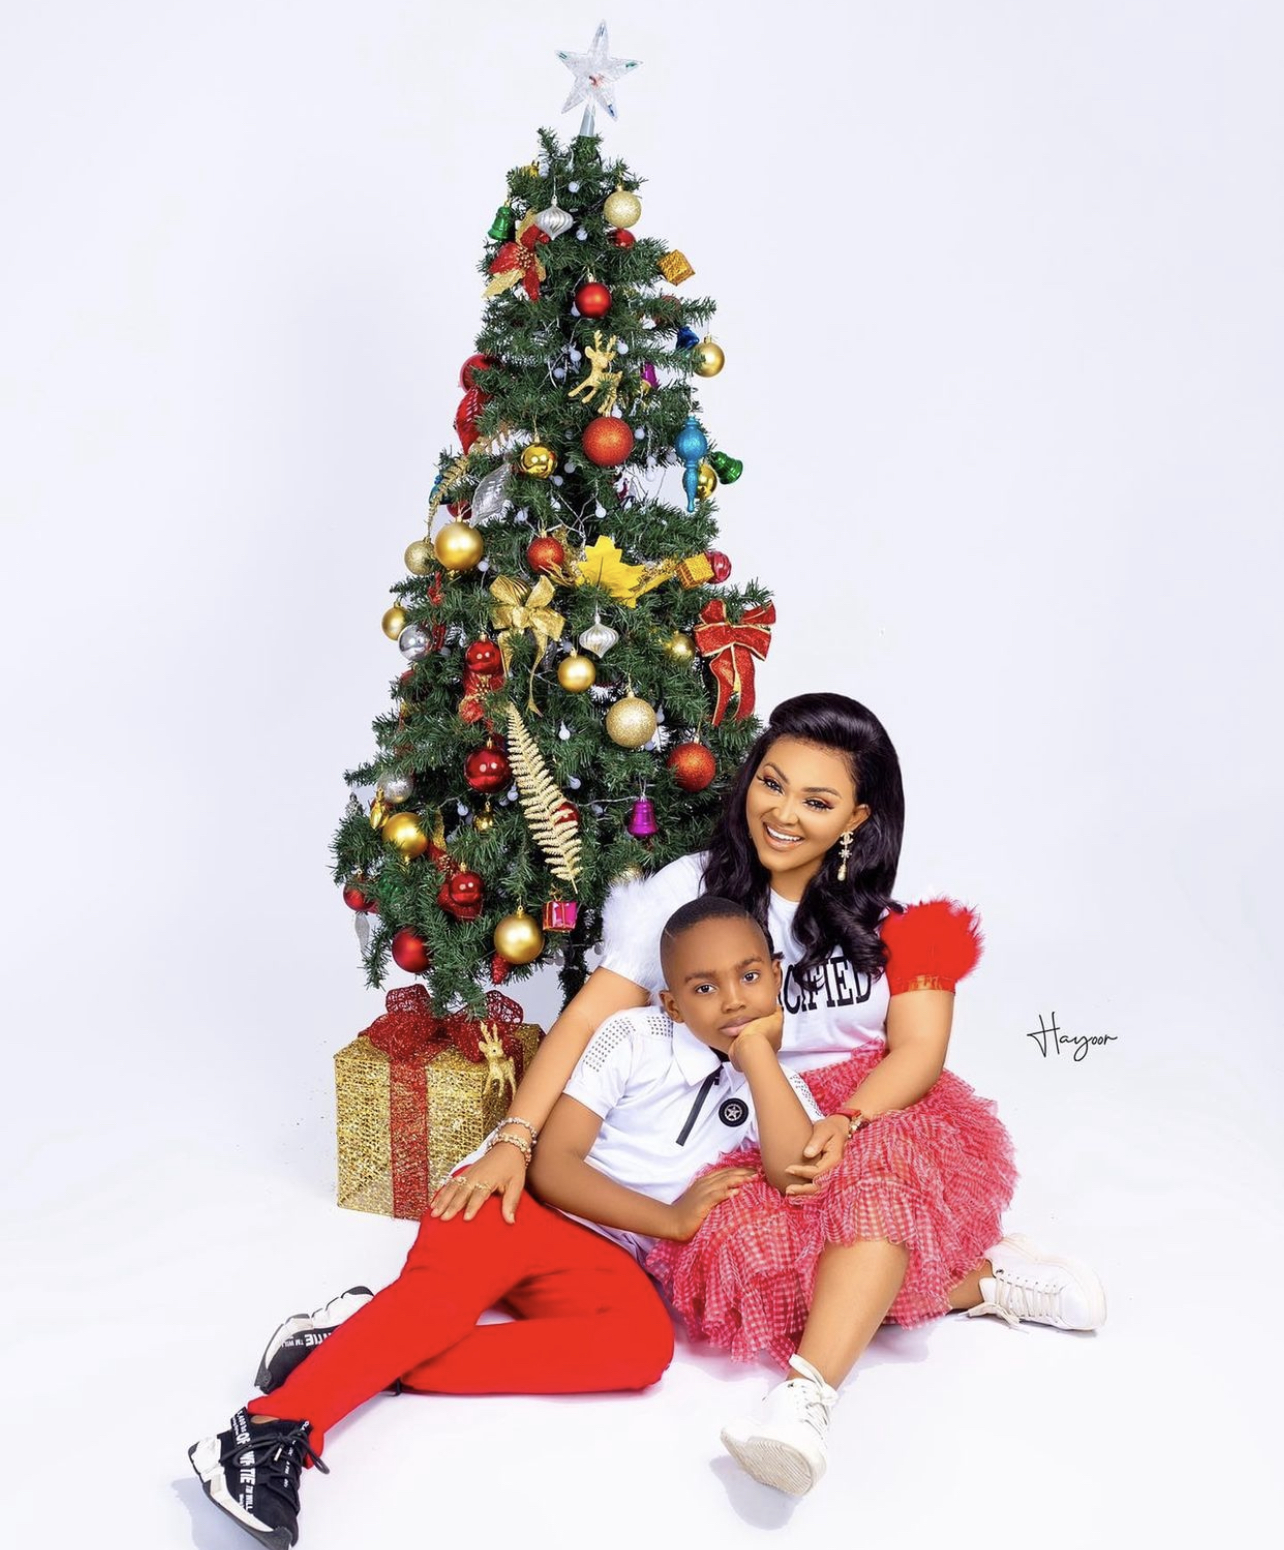 Mercy Aigbe and her son